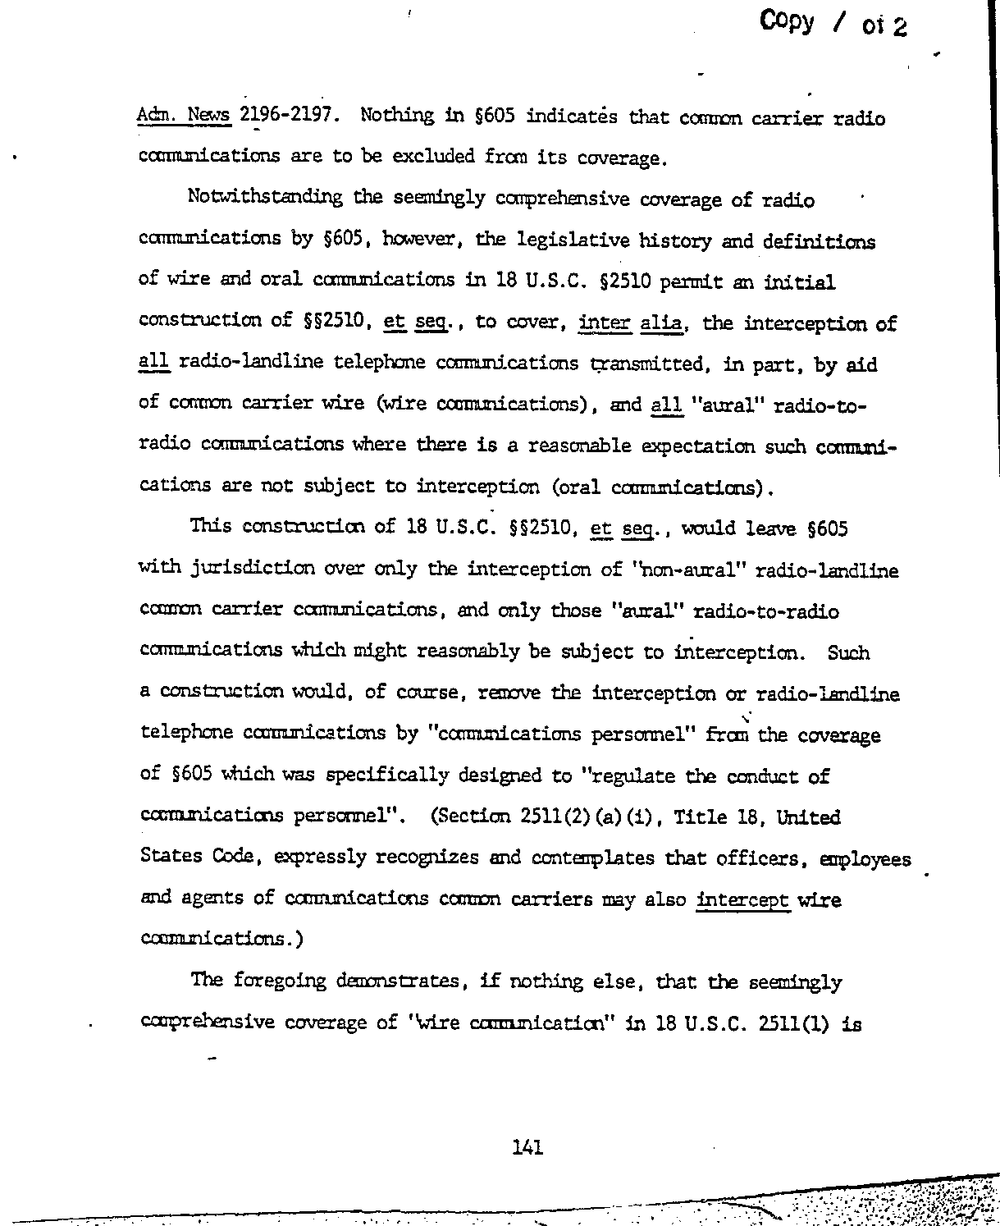 Page 149 from Report on Inquiry Into CIA Related Electronic Surveillance Activities